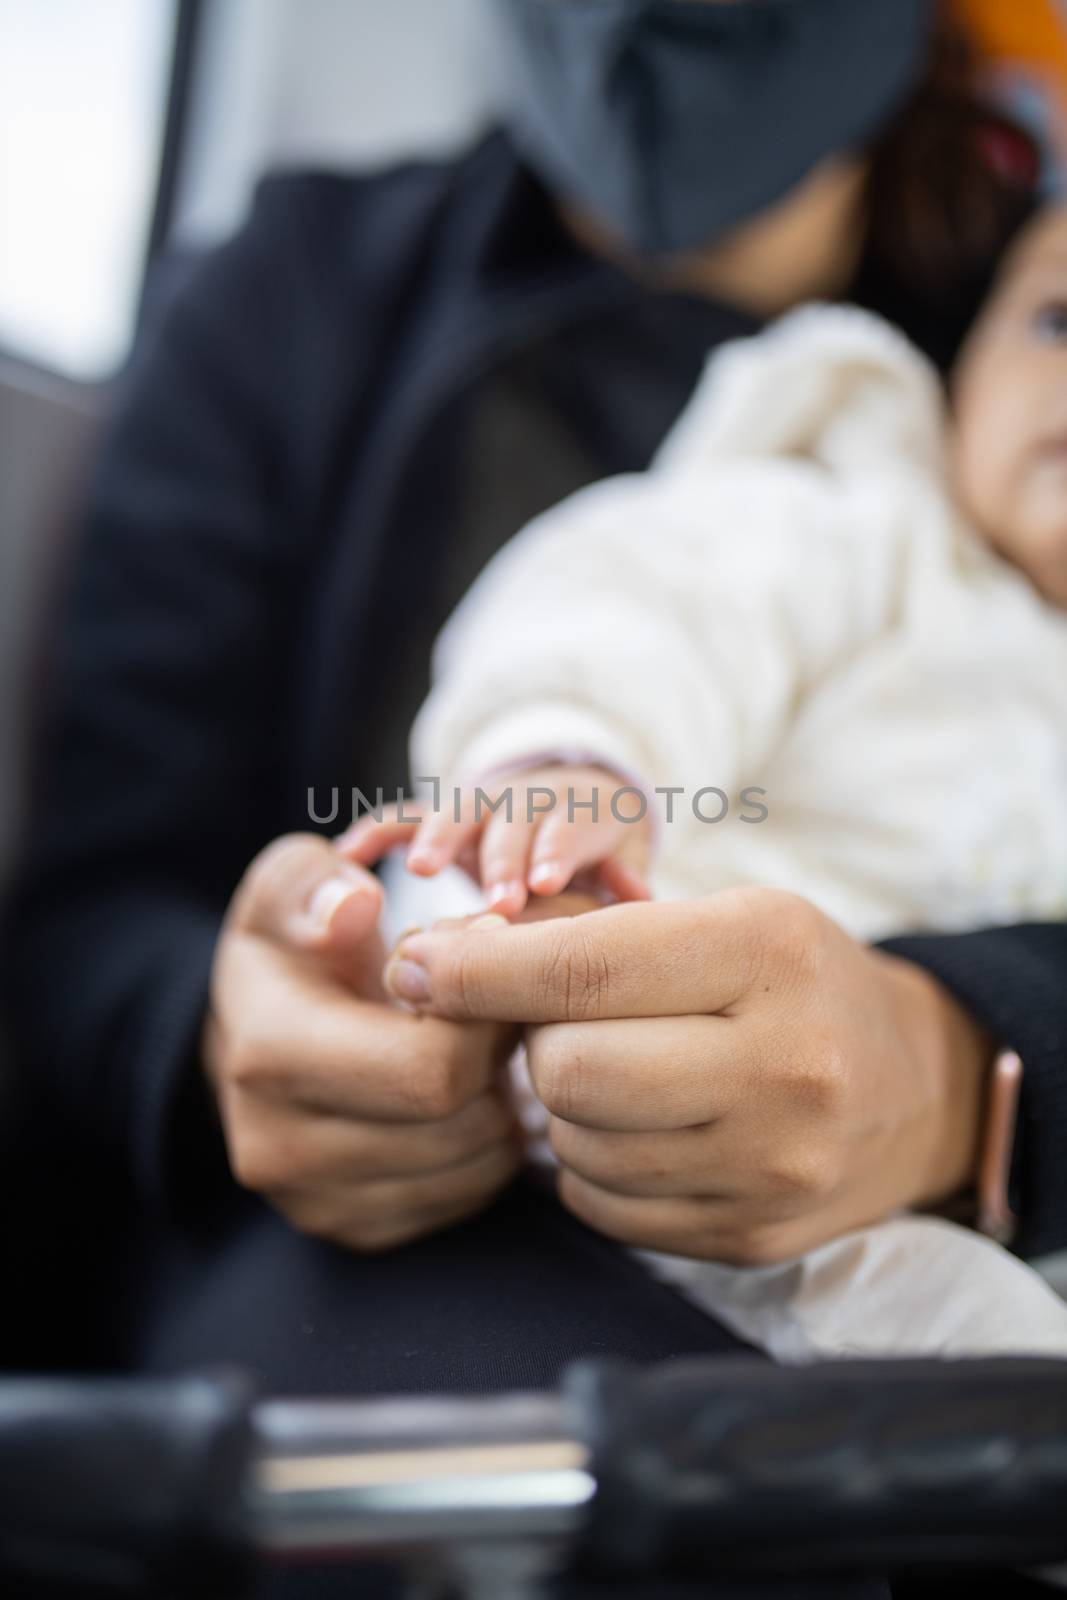 Little hand of a baby reaching the hands of her mother who is holding her as she sits next to a window